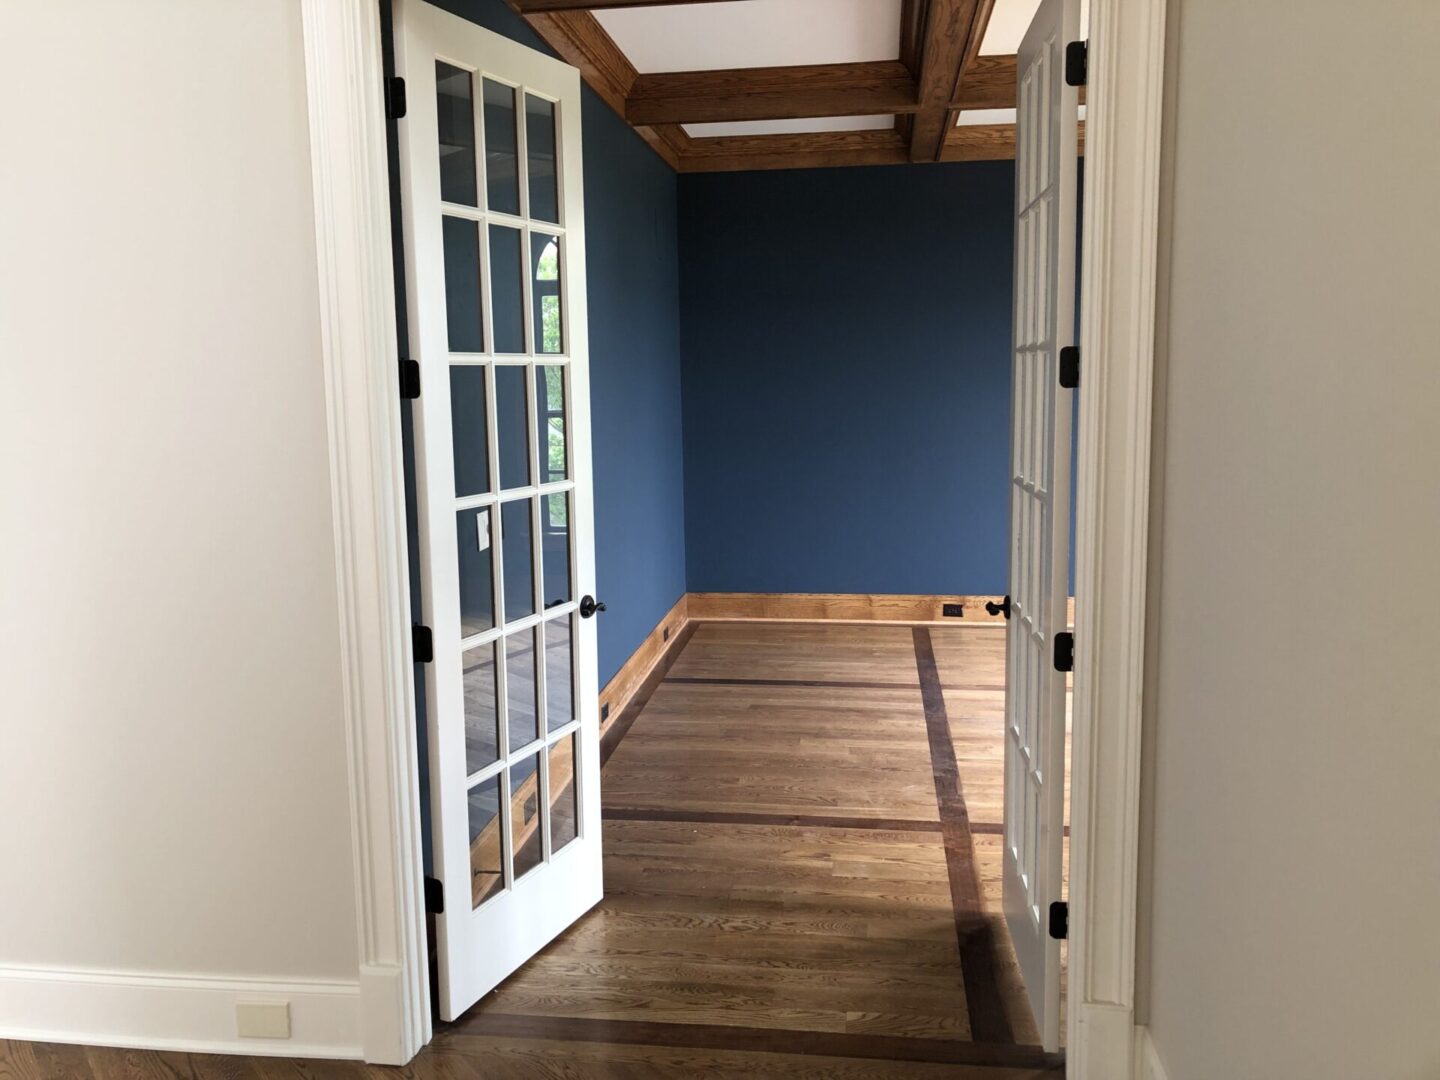 A door way with wood floors and blue walls.